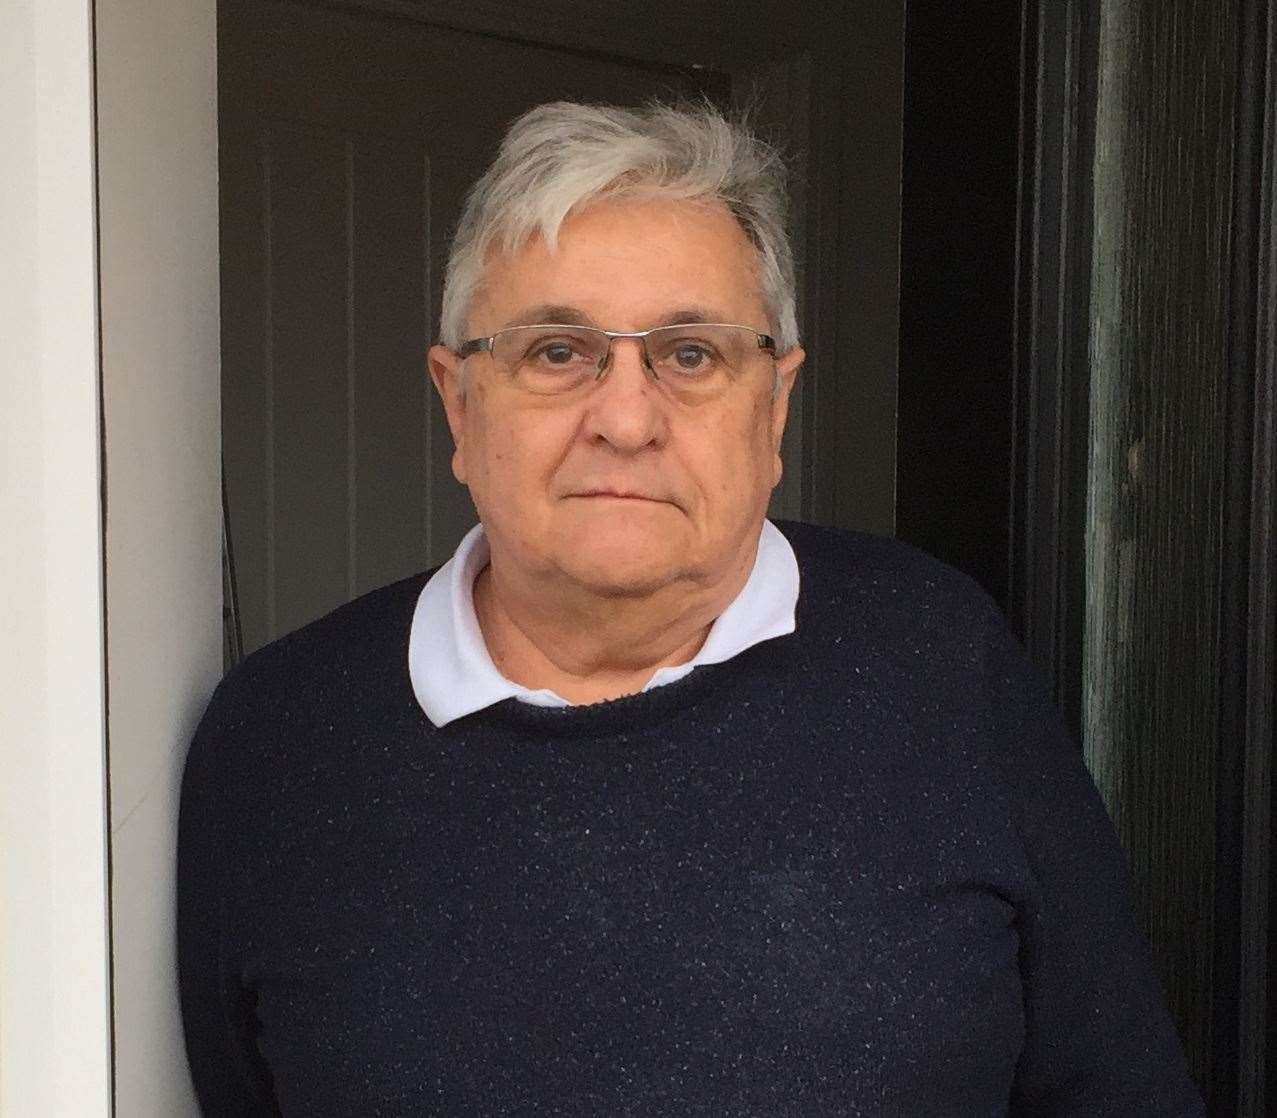 Jeremy Shand, 67, has concerns about vandalism in the area